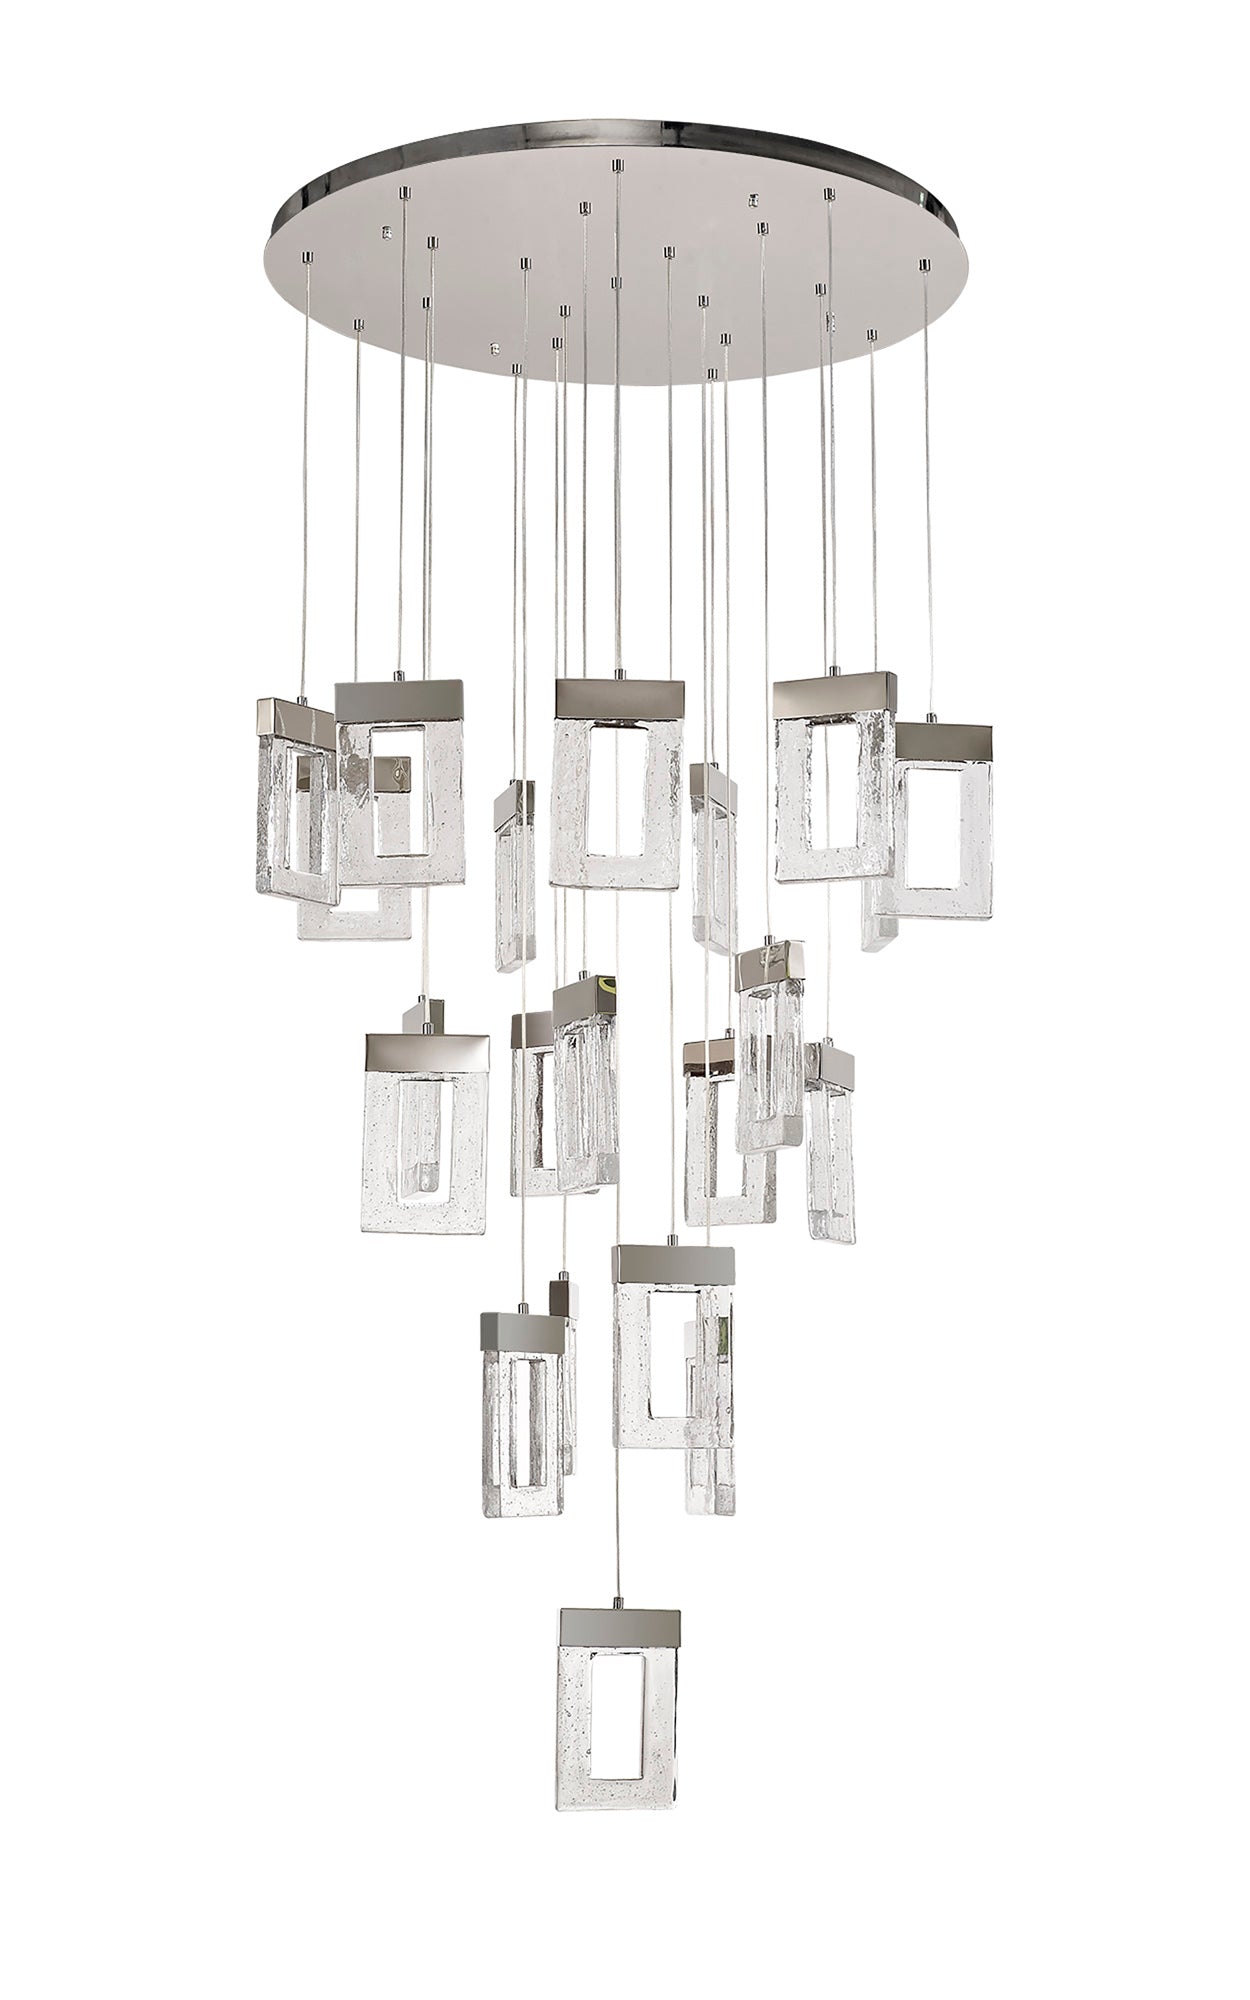 Asquith Pendant 5m, 21 x 4.5W LED, 3000K, 3360lm, Polished Chrome, 3yrs Warranty Item Weight: 25.8kg